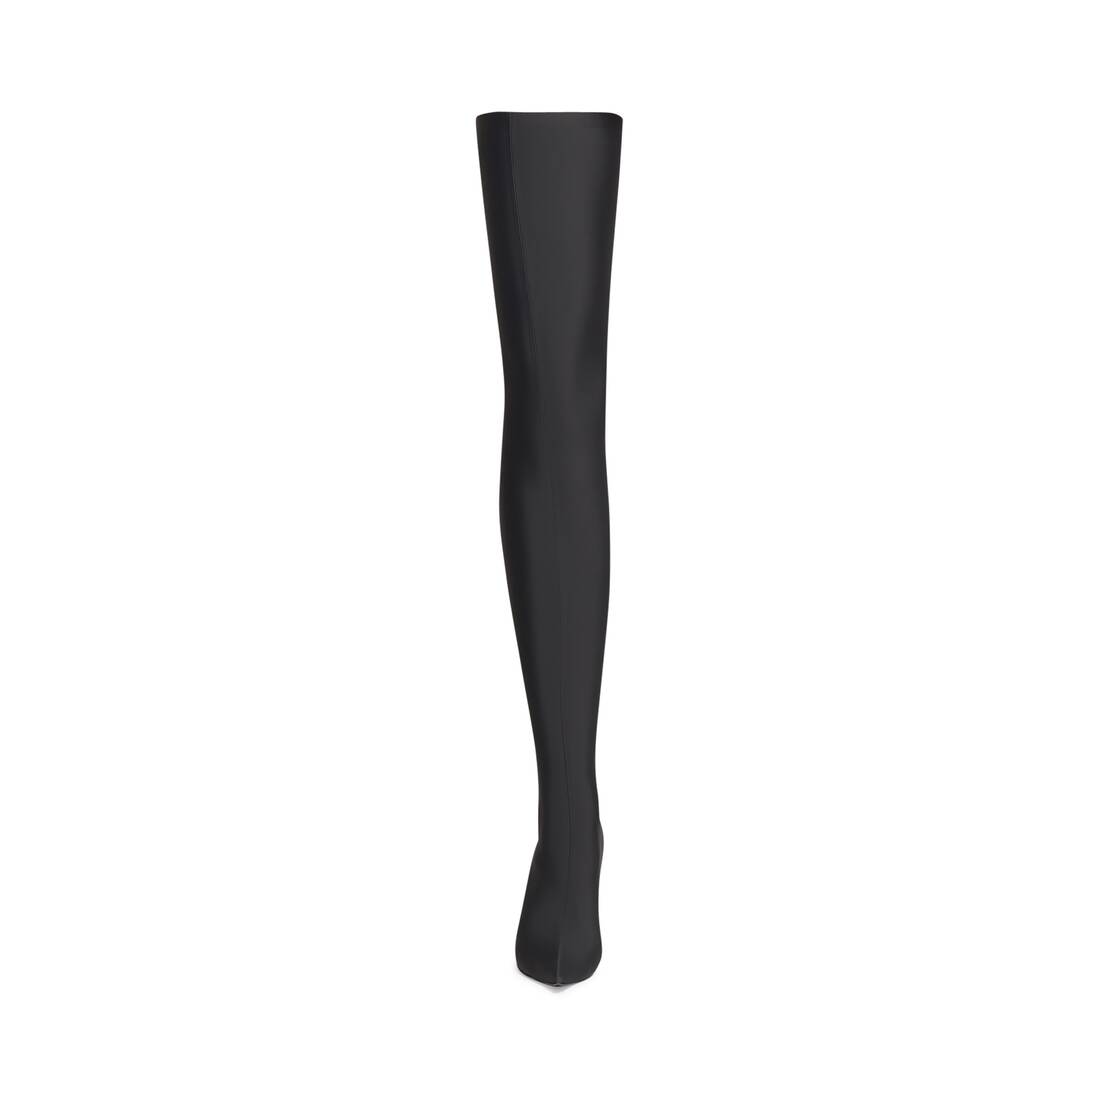 Women's Knife 110mm Over-the-knee Boot in Black | Balenciaga US